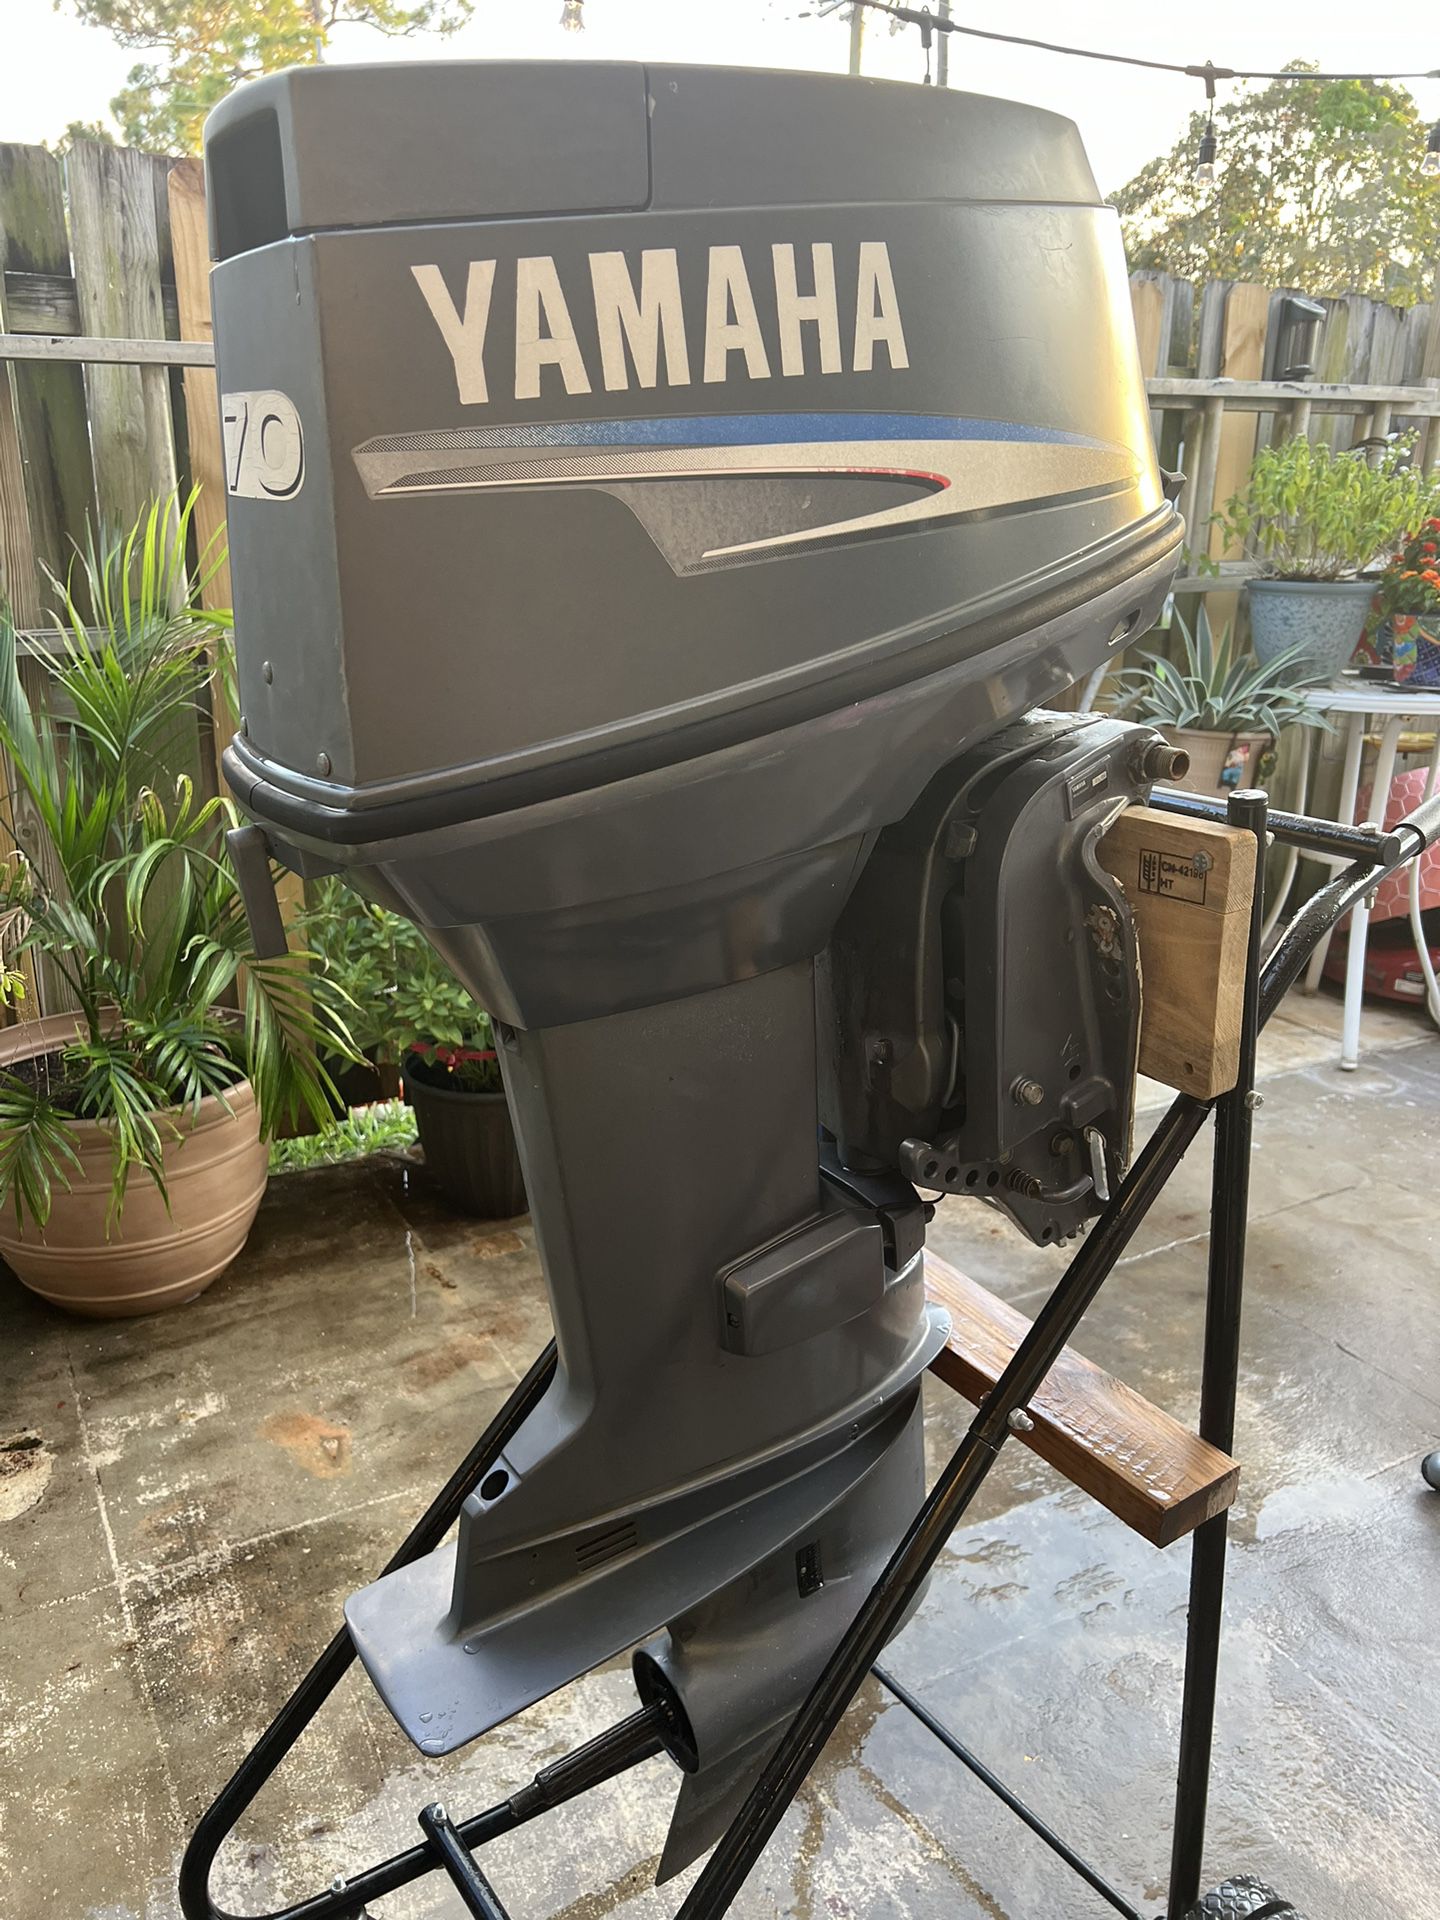 70 HP Yamaha Outboard Motor 2-Stroke 20" 70TLRD 130 PSI all- oil injected 2006